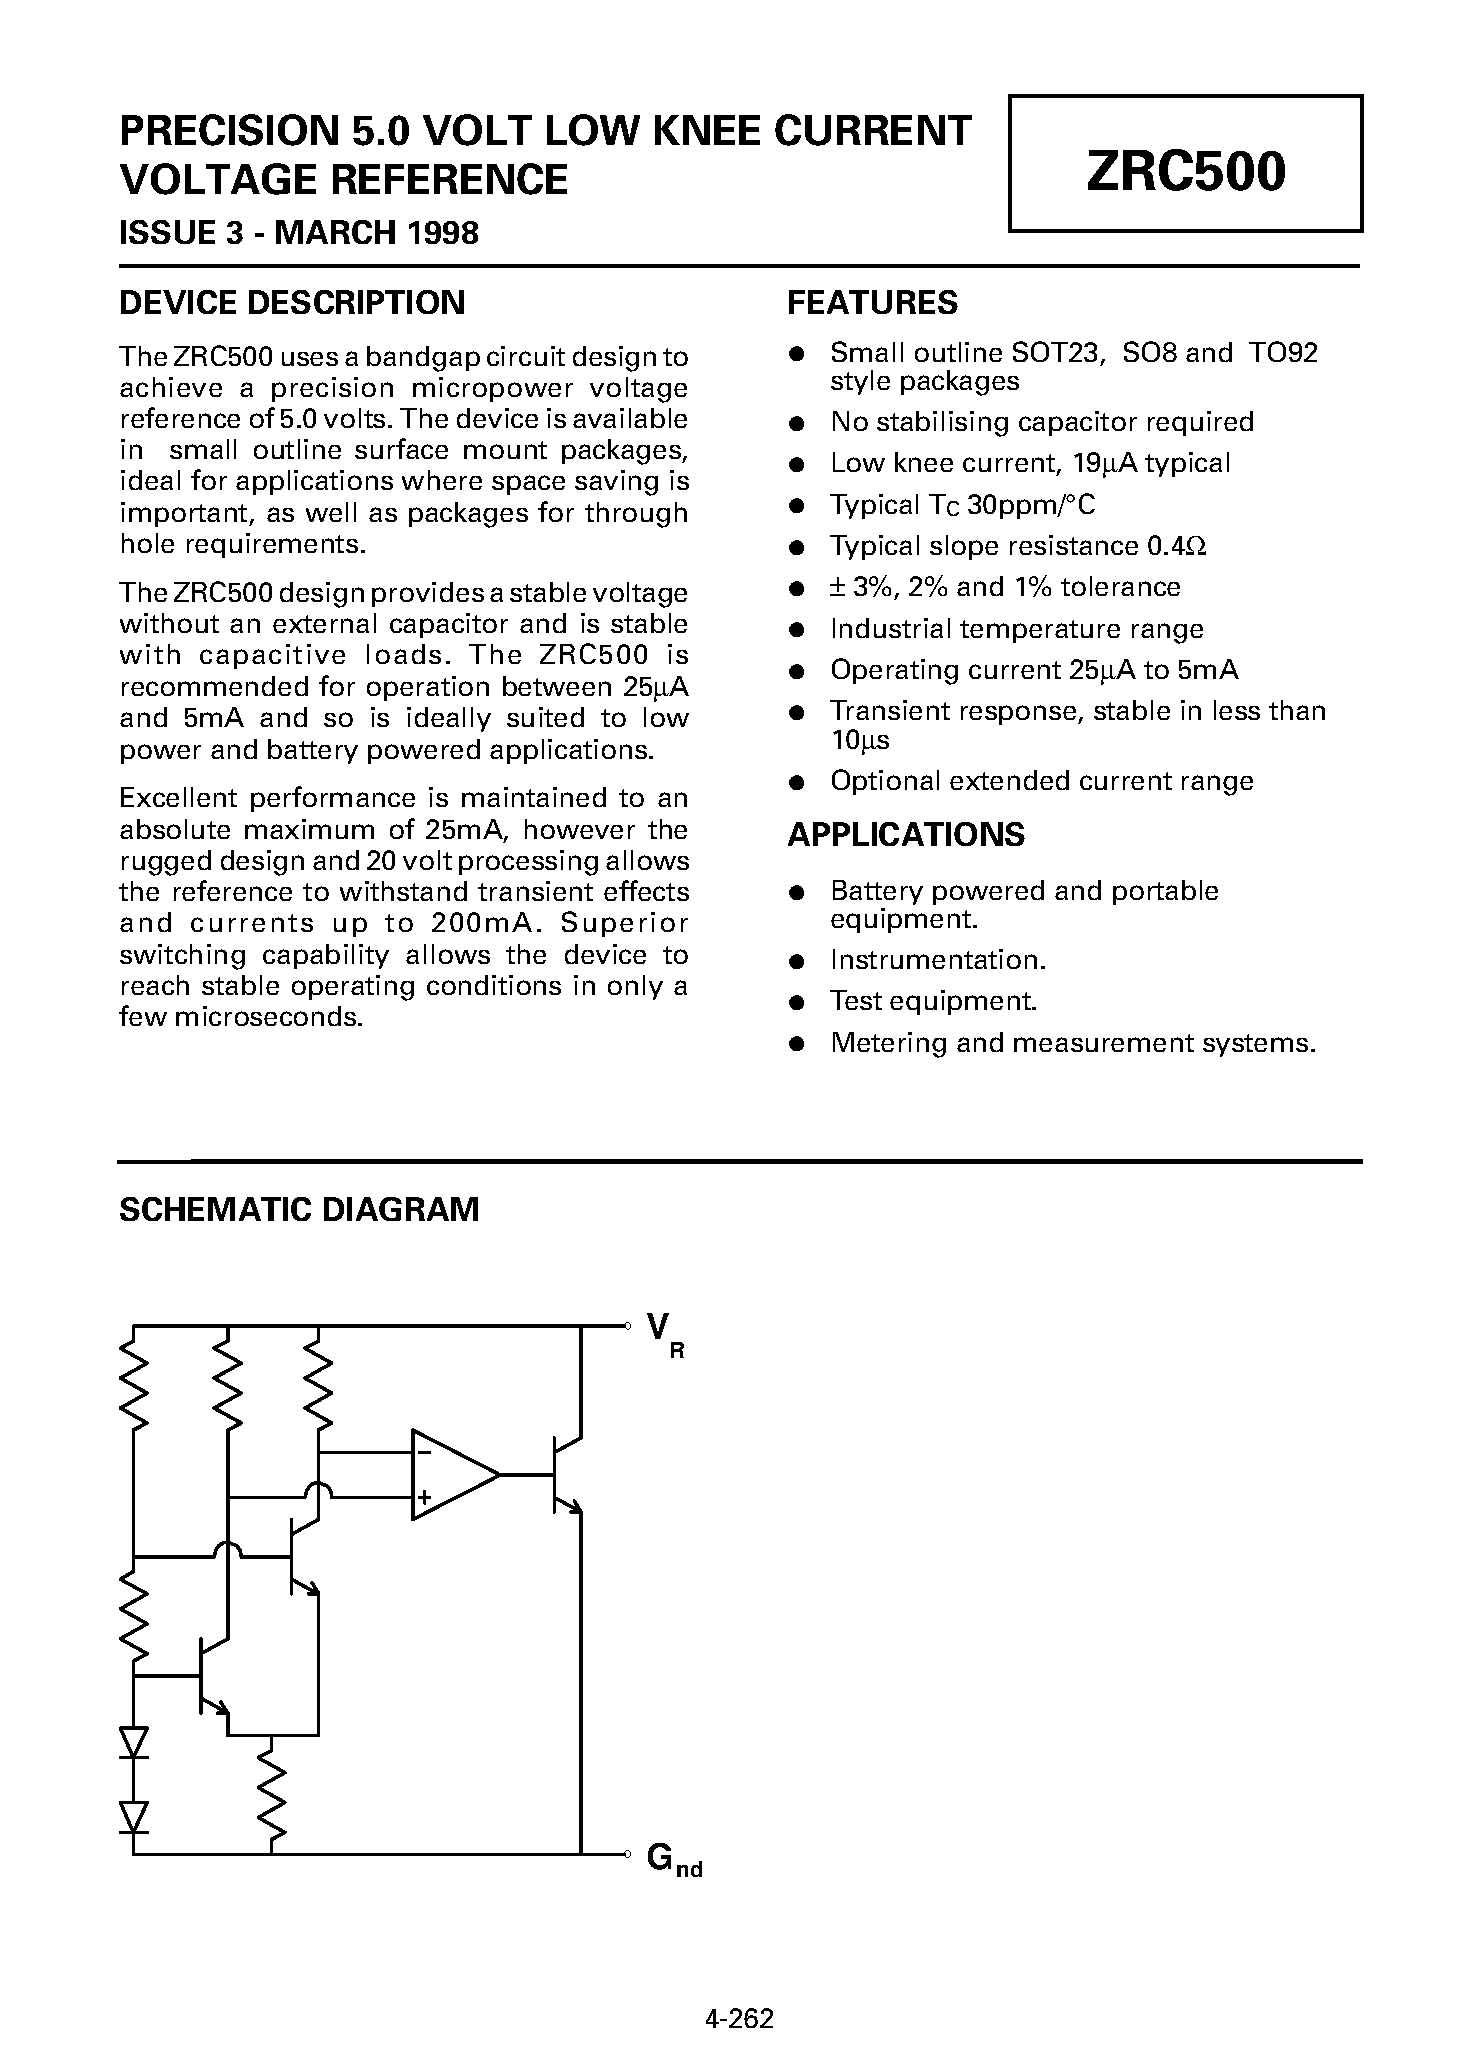 Datasheet ZRC500 - PRECISION 5.0 VOLT LOW KNEE CURRENT VOLTAGE REFERENCE page 1